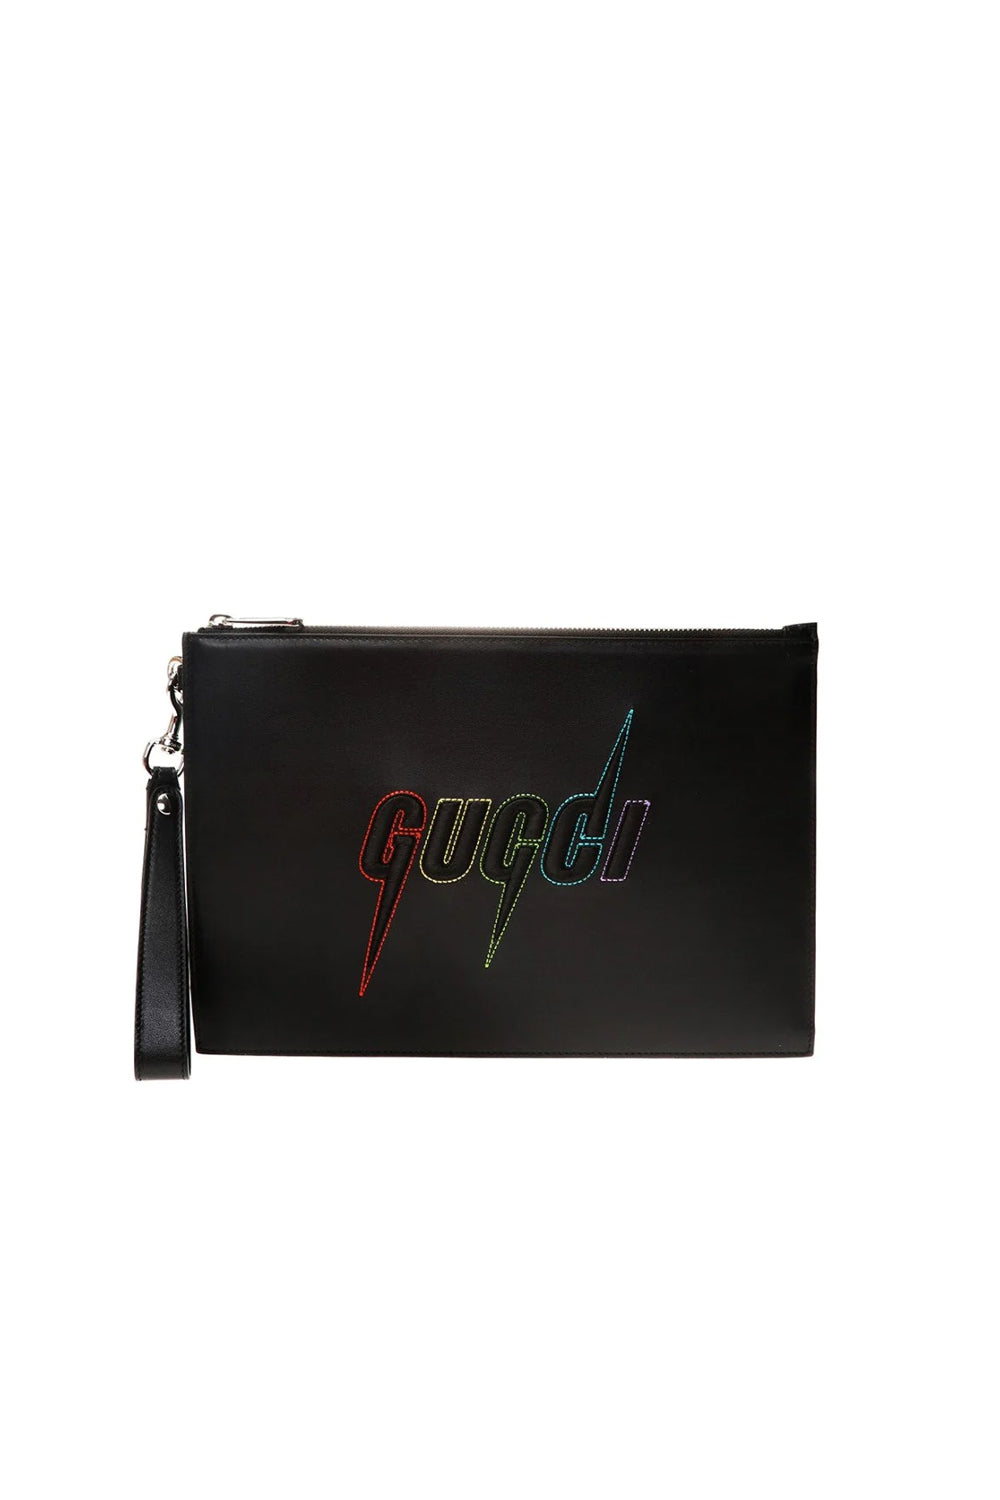 New Gucci Blade Embroidered Black Leather Pouch Wristlet Bag 597678 